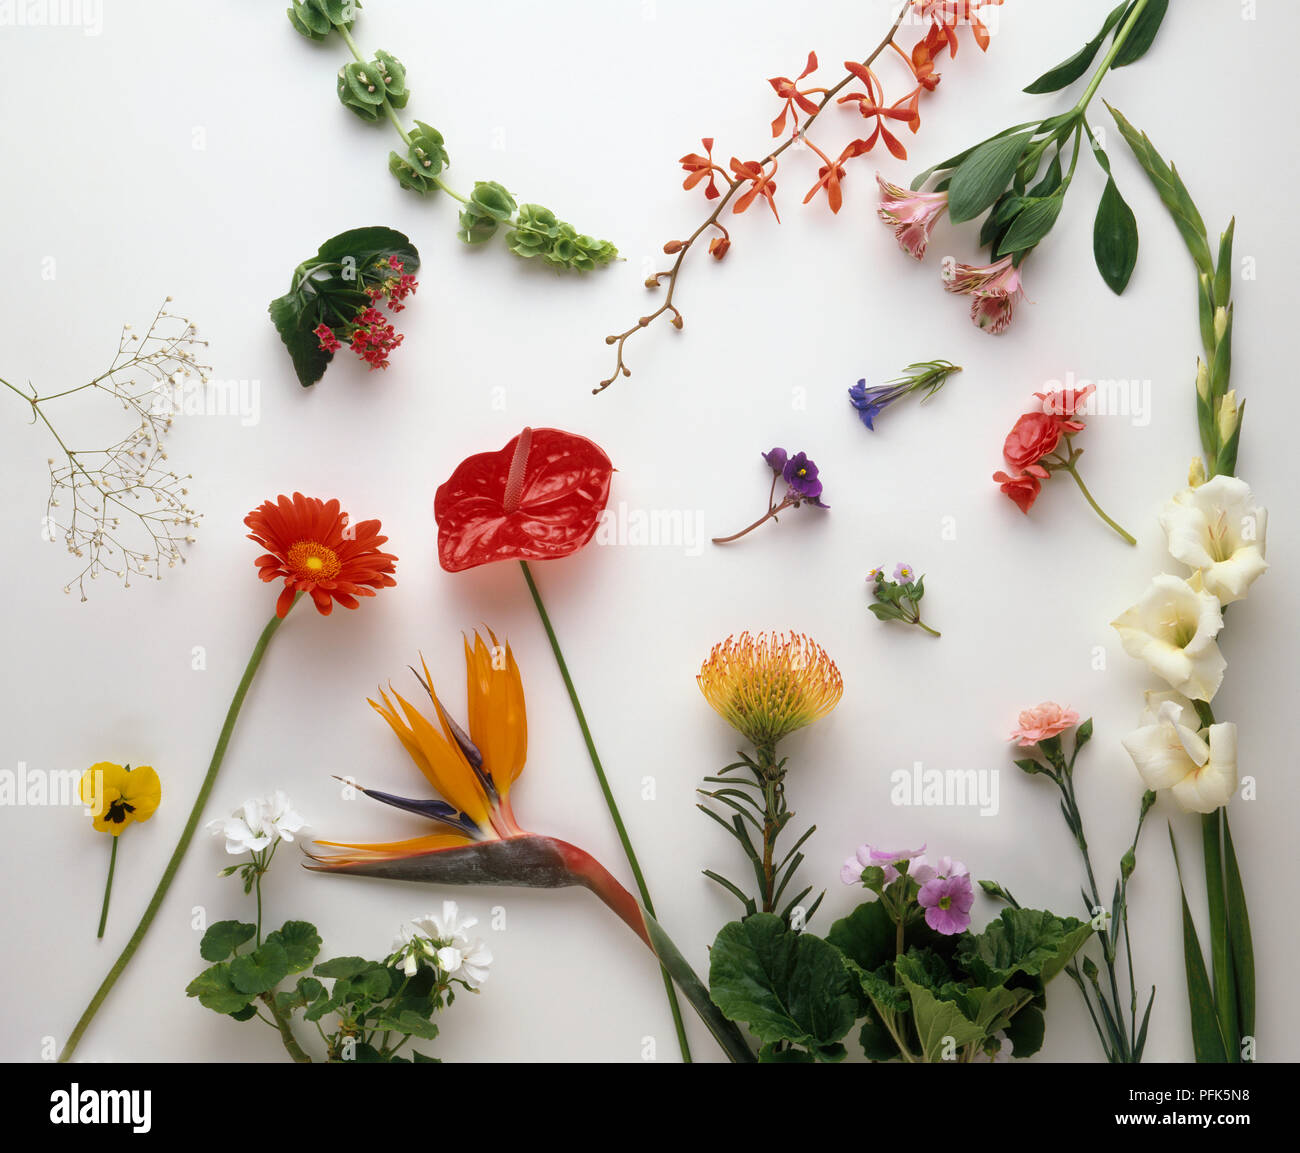 Various flower and stem cuttings Stock Photo